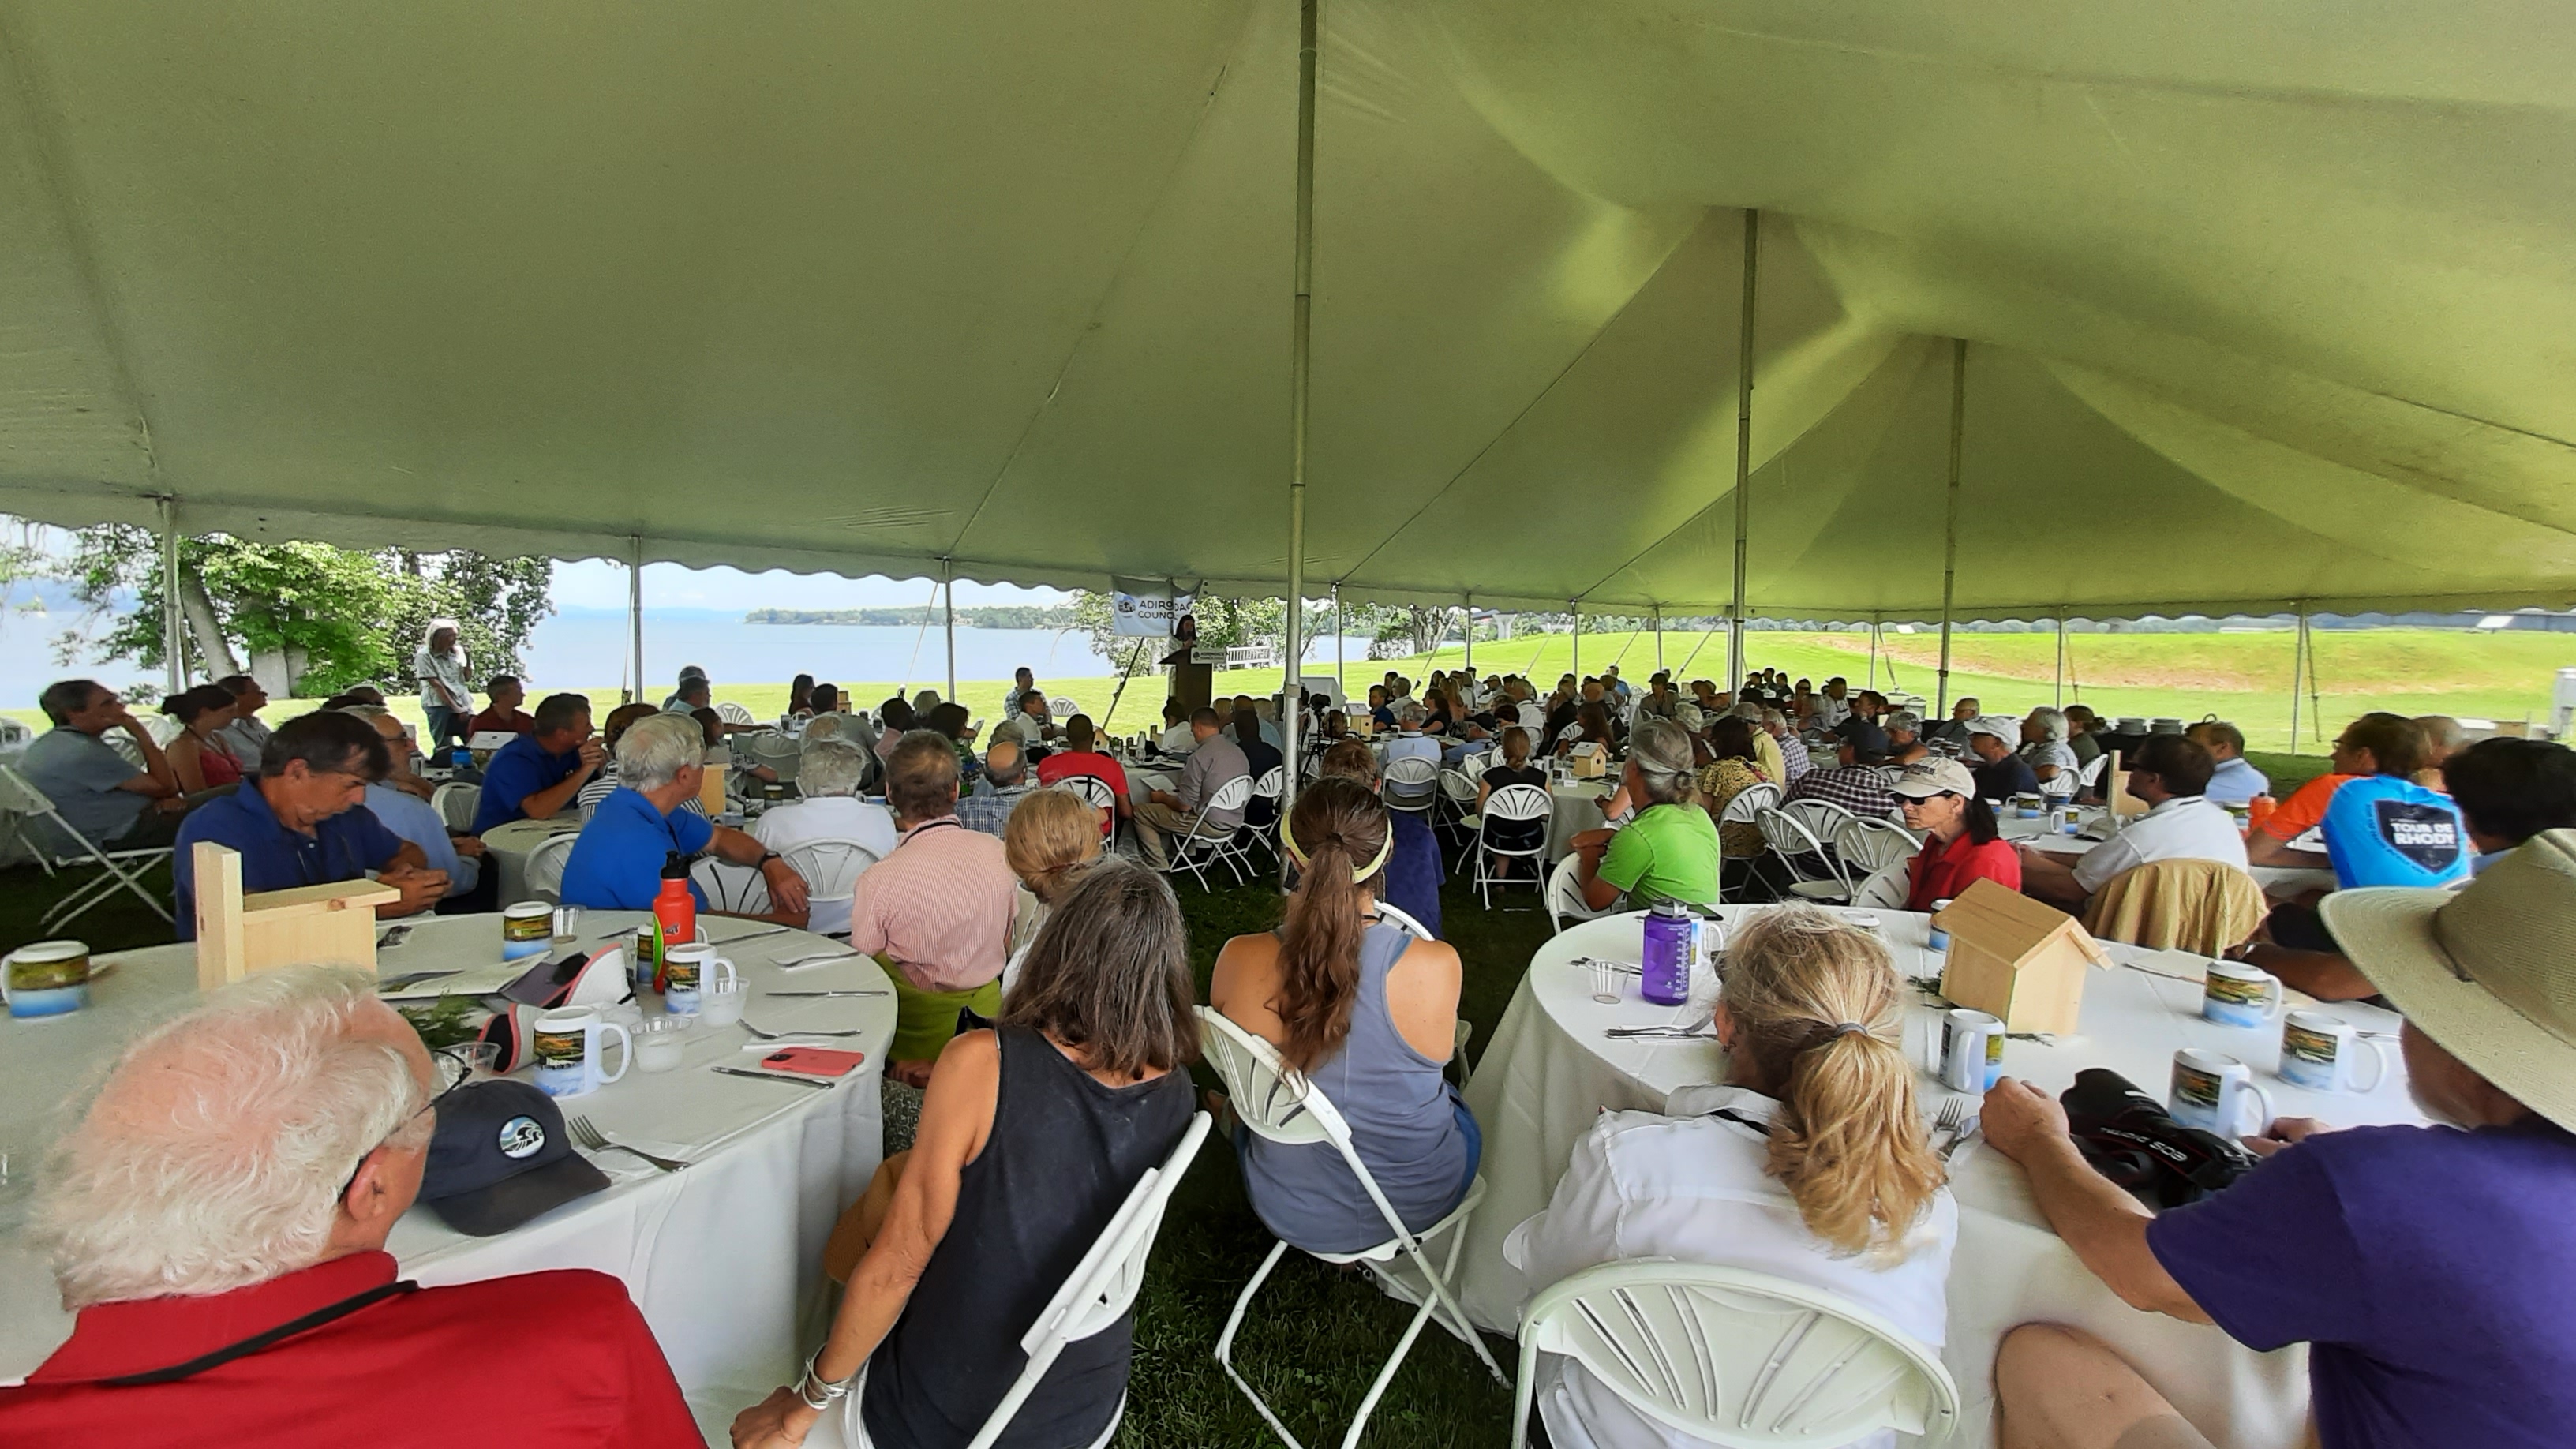 A crowd of over 200 enjoys the shade of the large tent during speeches, awards, and lunch